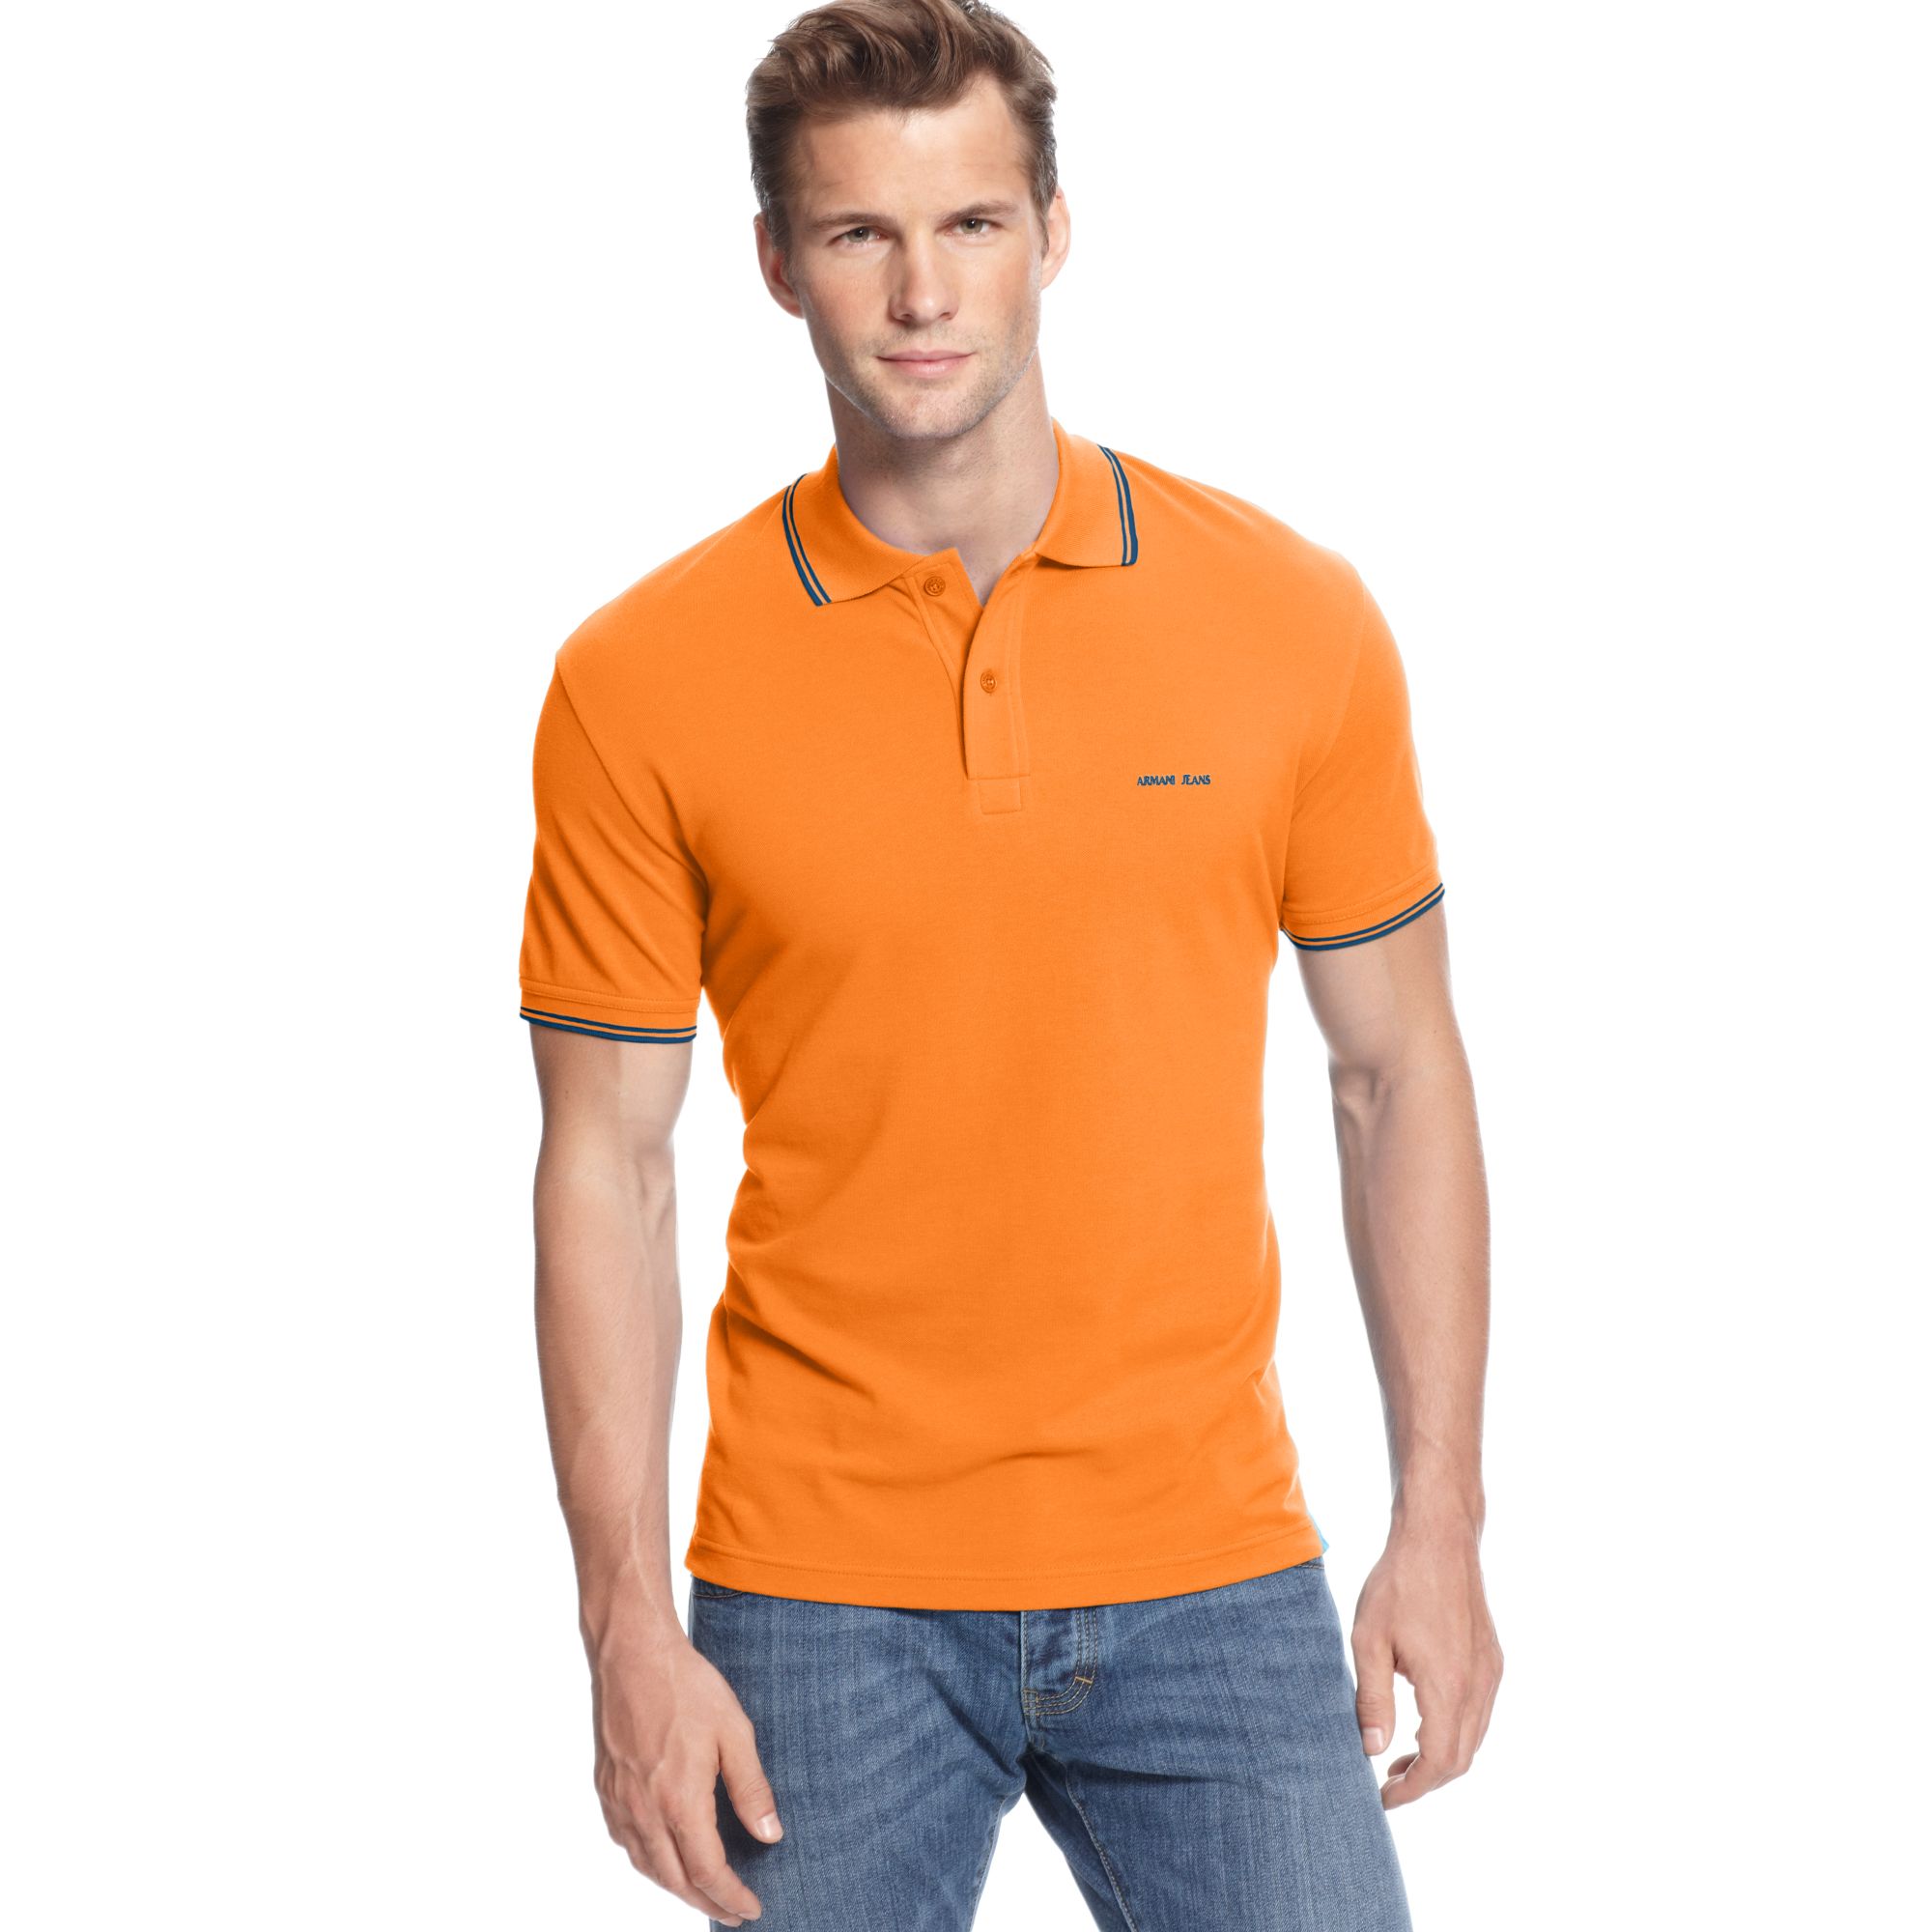 Armani Jeans Tipped Pique Polo Shirt in Orange for Men (Orange/Navy) | Lyst